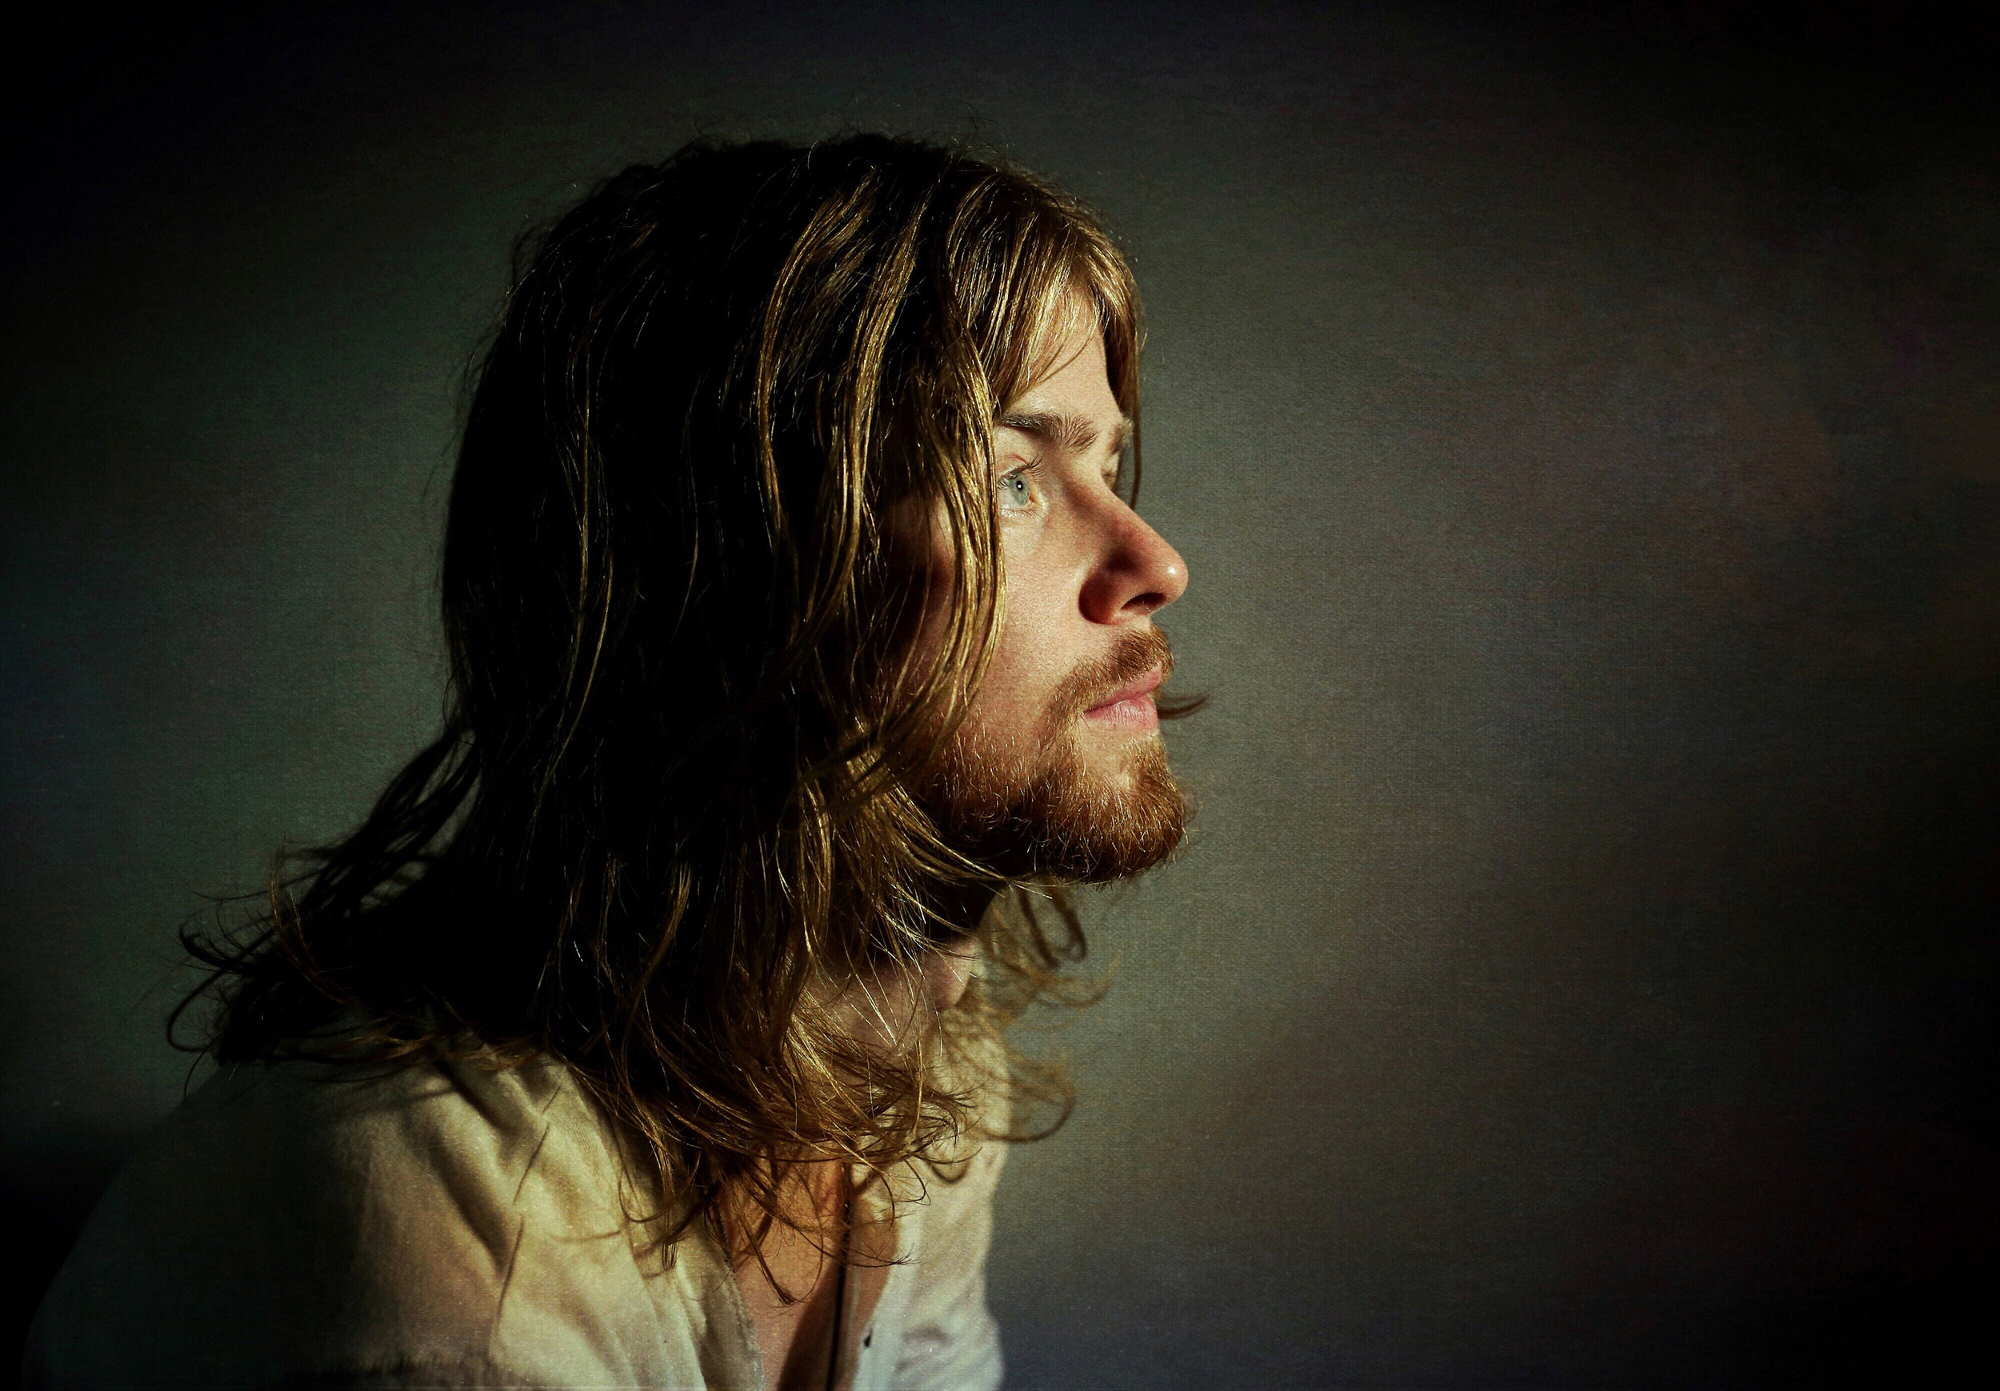 Andrew Leahey Shares Deep Meaning Behind “New Memories”